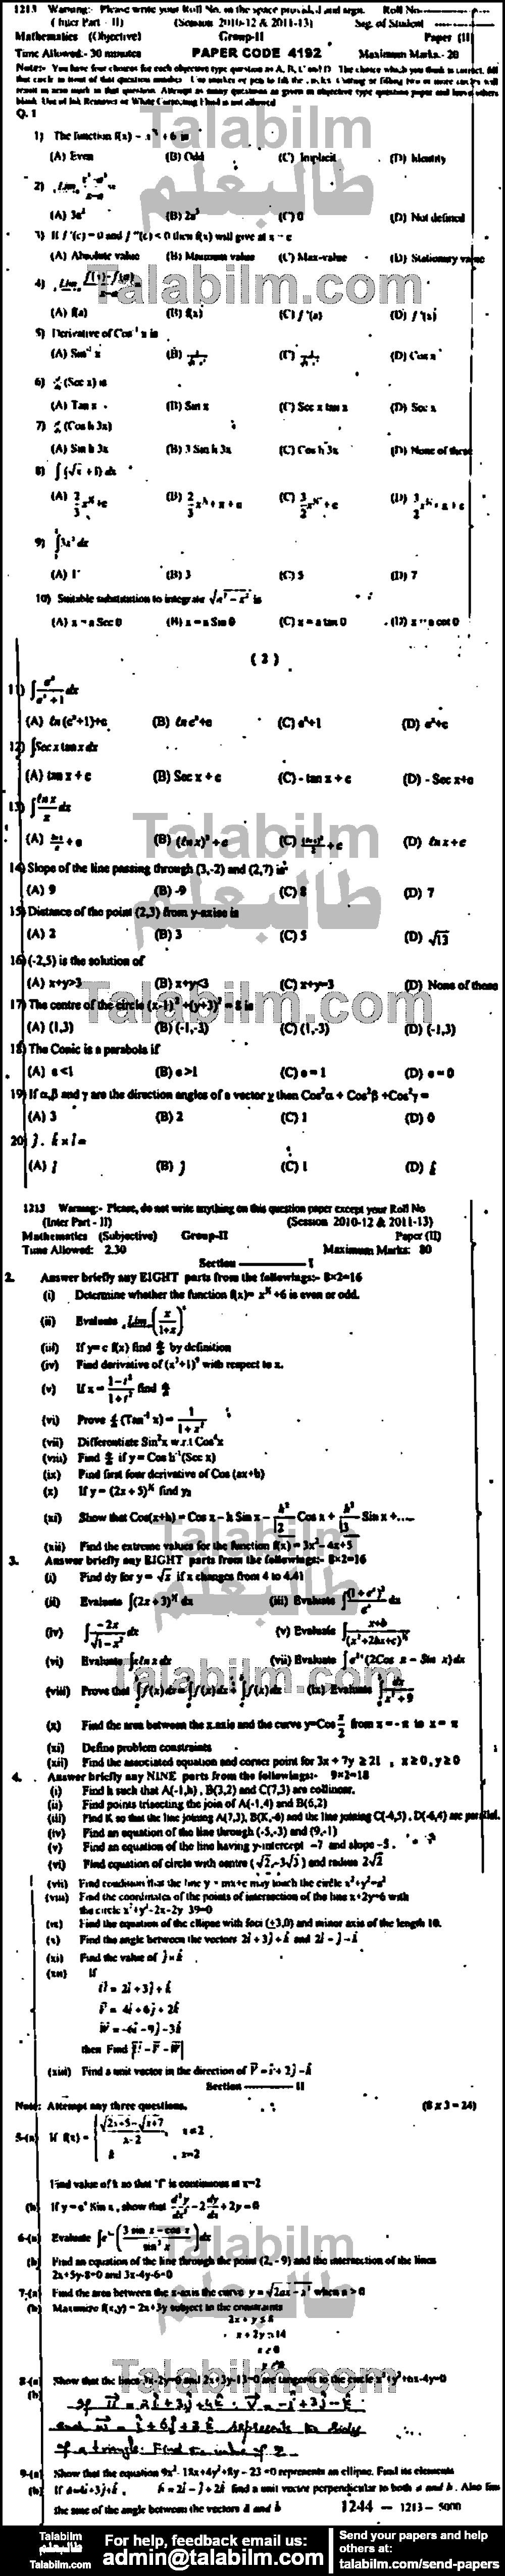 Math 0 past paper for Group-II 2013